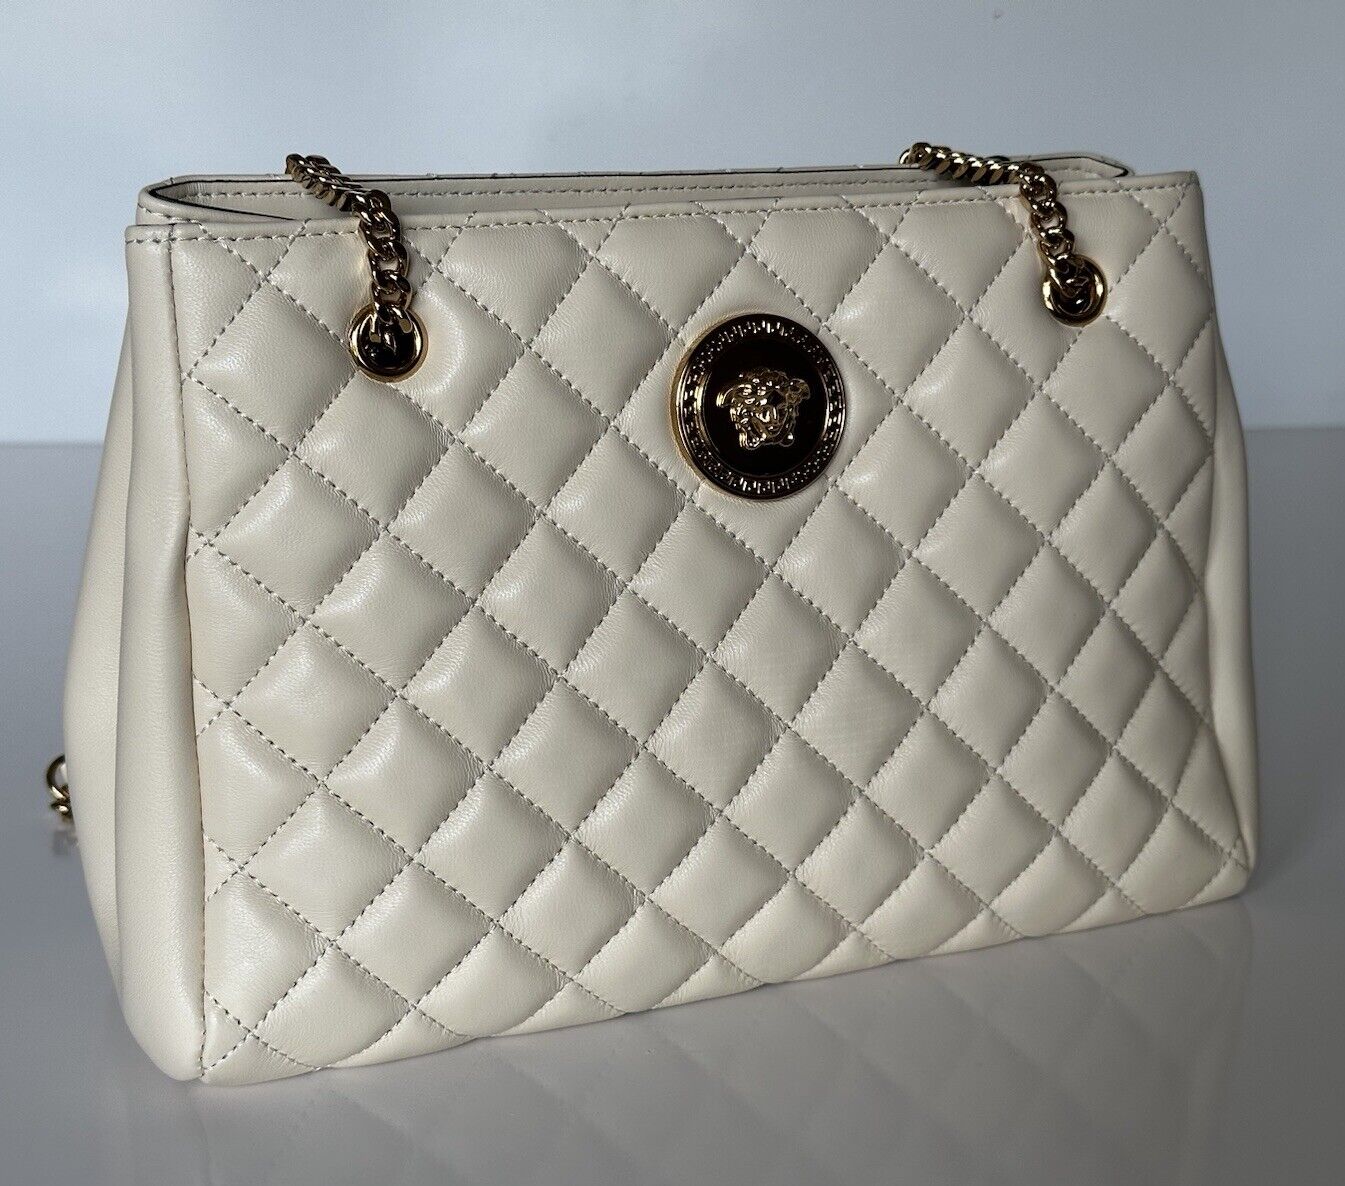 Versace Evening Quilted Lamb Leather Off-White Shoulder Bag 1005560 NWT $1775